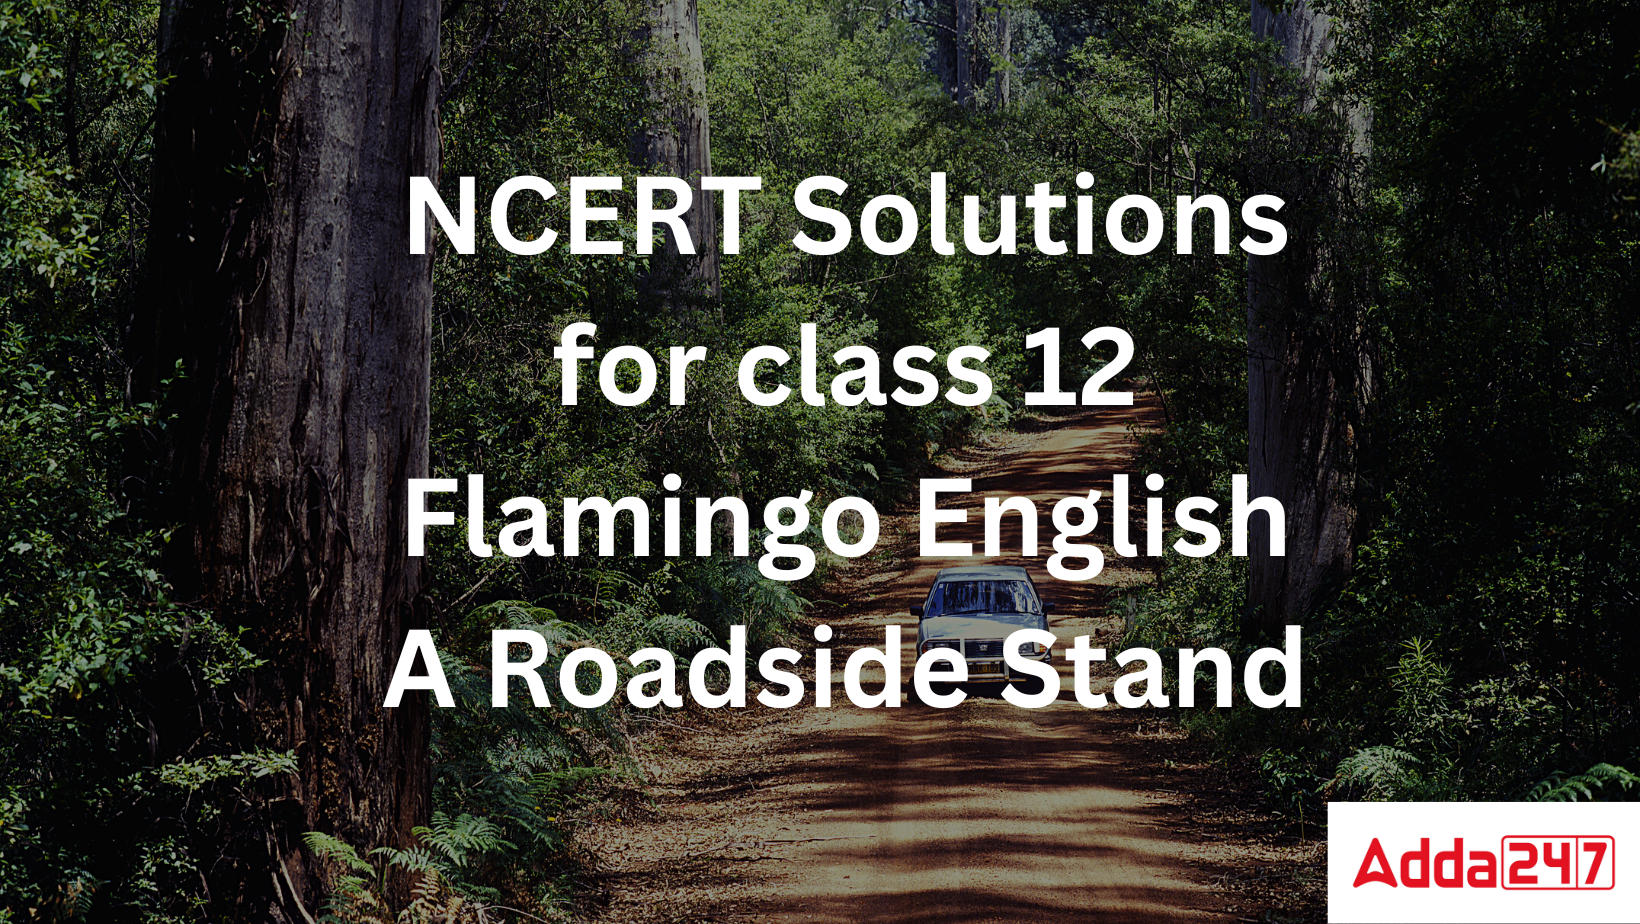 NCERT Solutions for class 12 Flamingo English A Roadside Stand